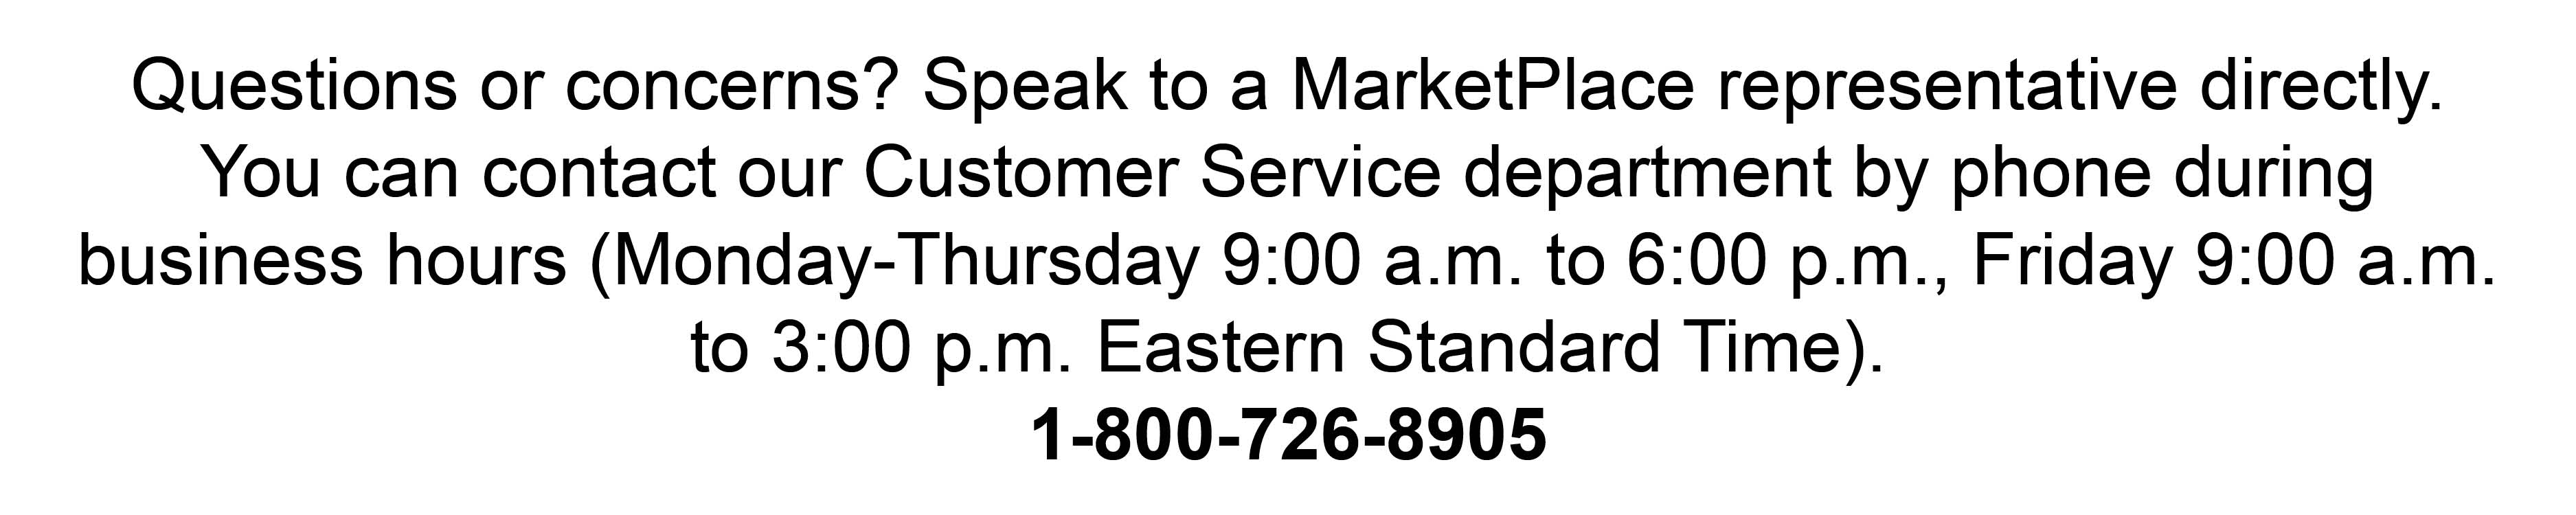 Questions or concerns? Speak to a MarketPlace representative directly. You can contact our Customer Service department by phone during business hours (Monday-Thursday 9:00 a.m. to 6:00 p.m., Friday 9:00 a.m. to 3:00 p.m. Eastern Standard Time). 1-800-726-8905